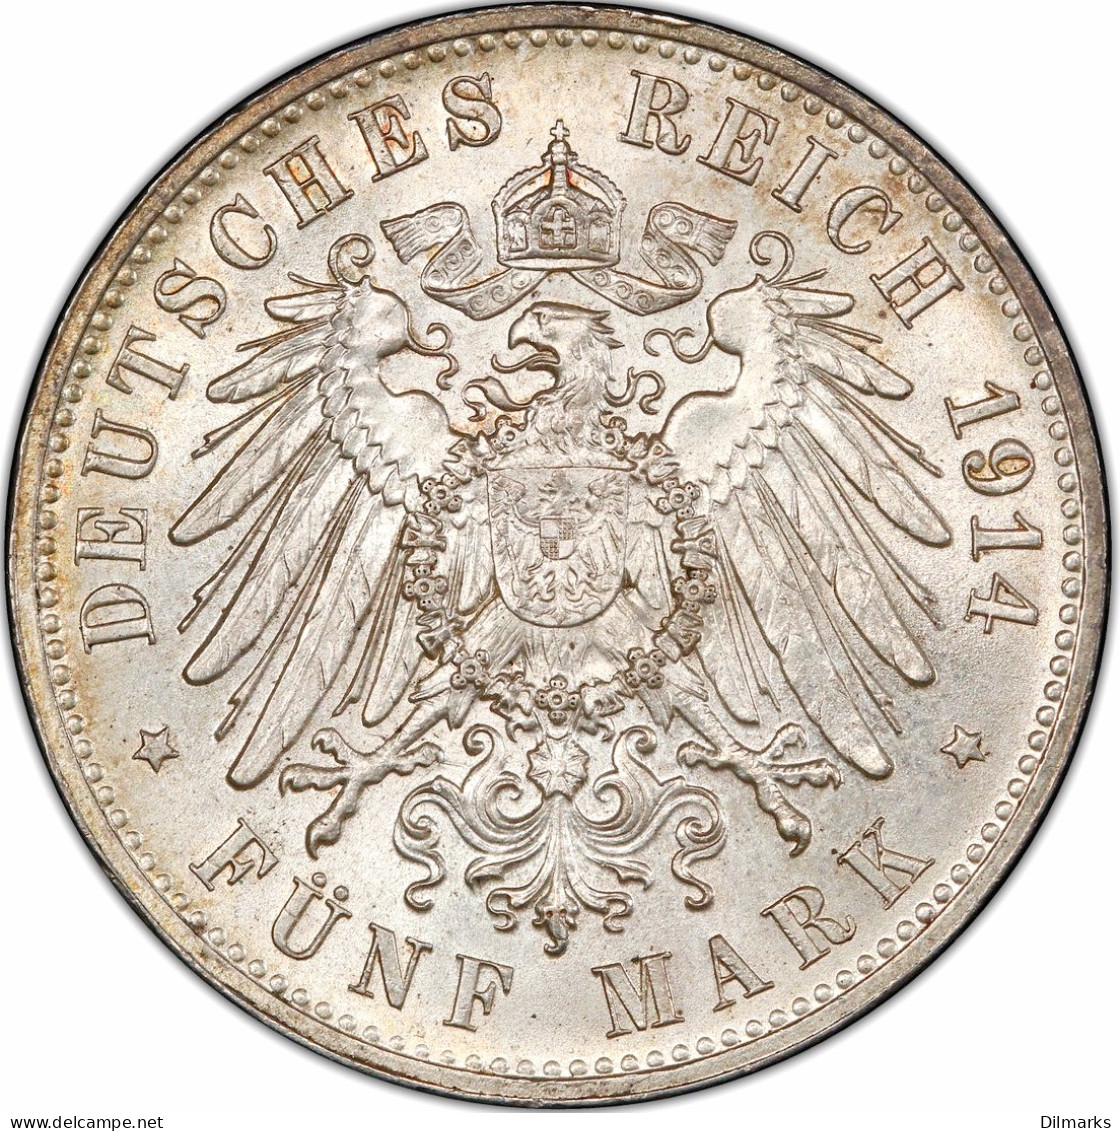 Saxony 5 Mark 1914, PCGS MS63, &quot;King Friedrich August III (1904 - 1918)&quot; - 2, 3 & 5 Mark Silber